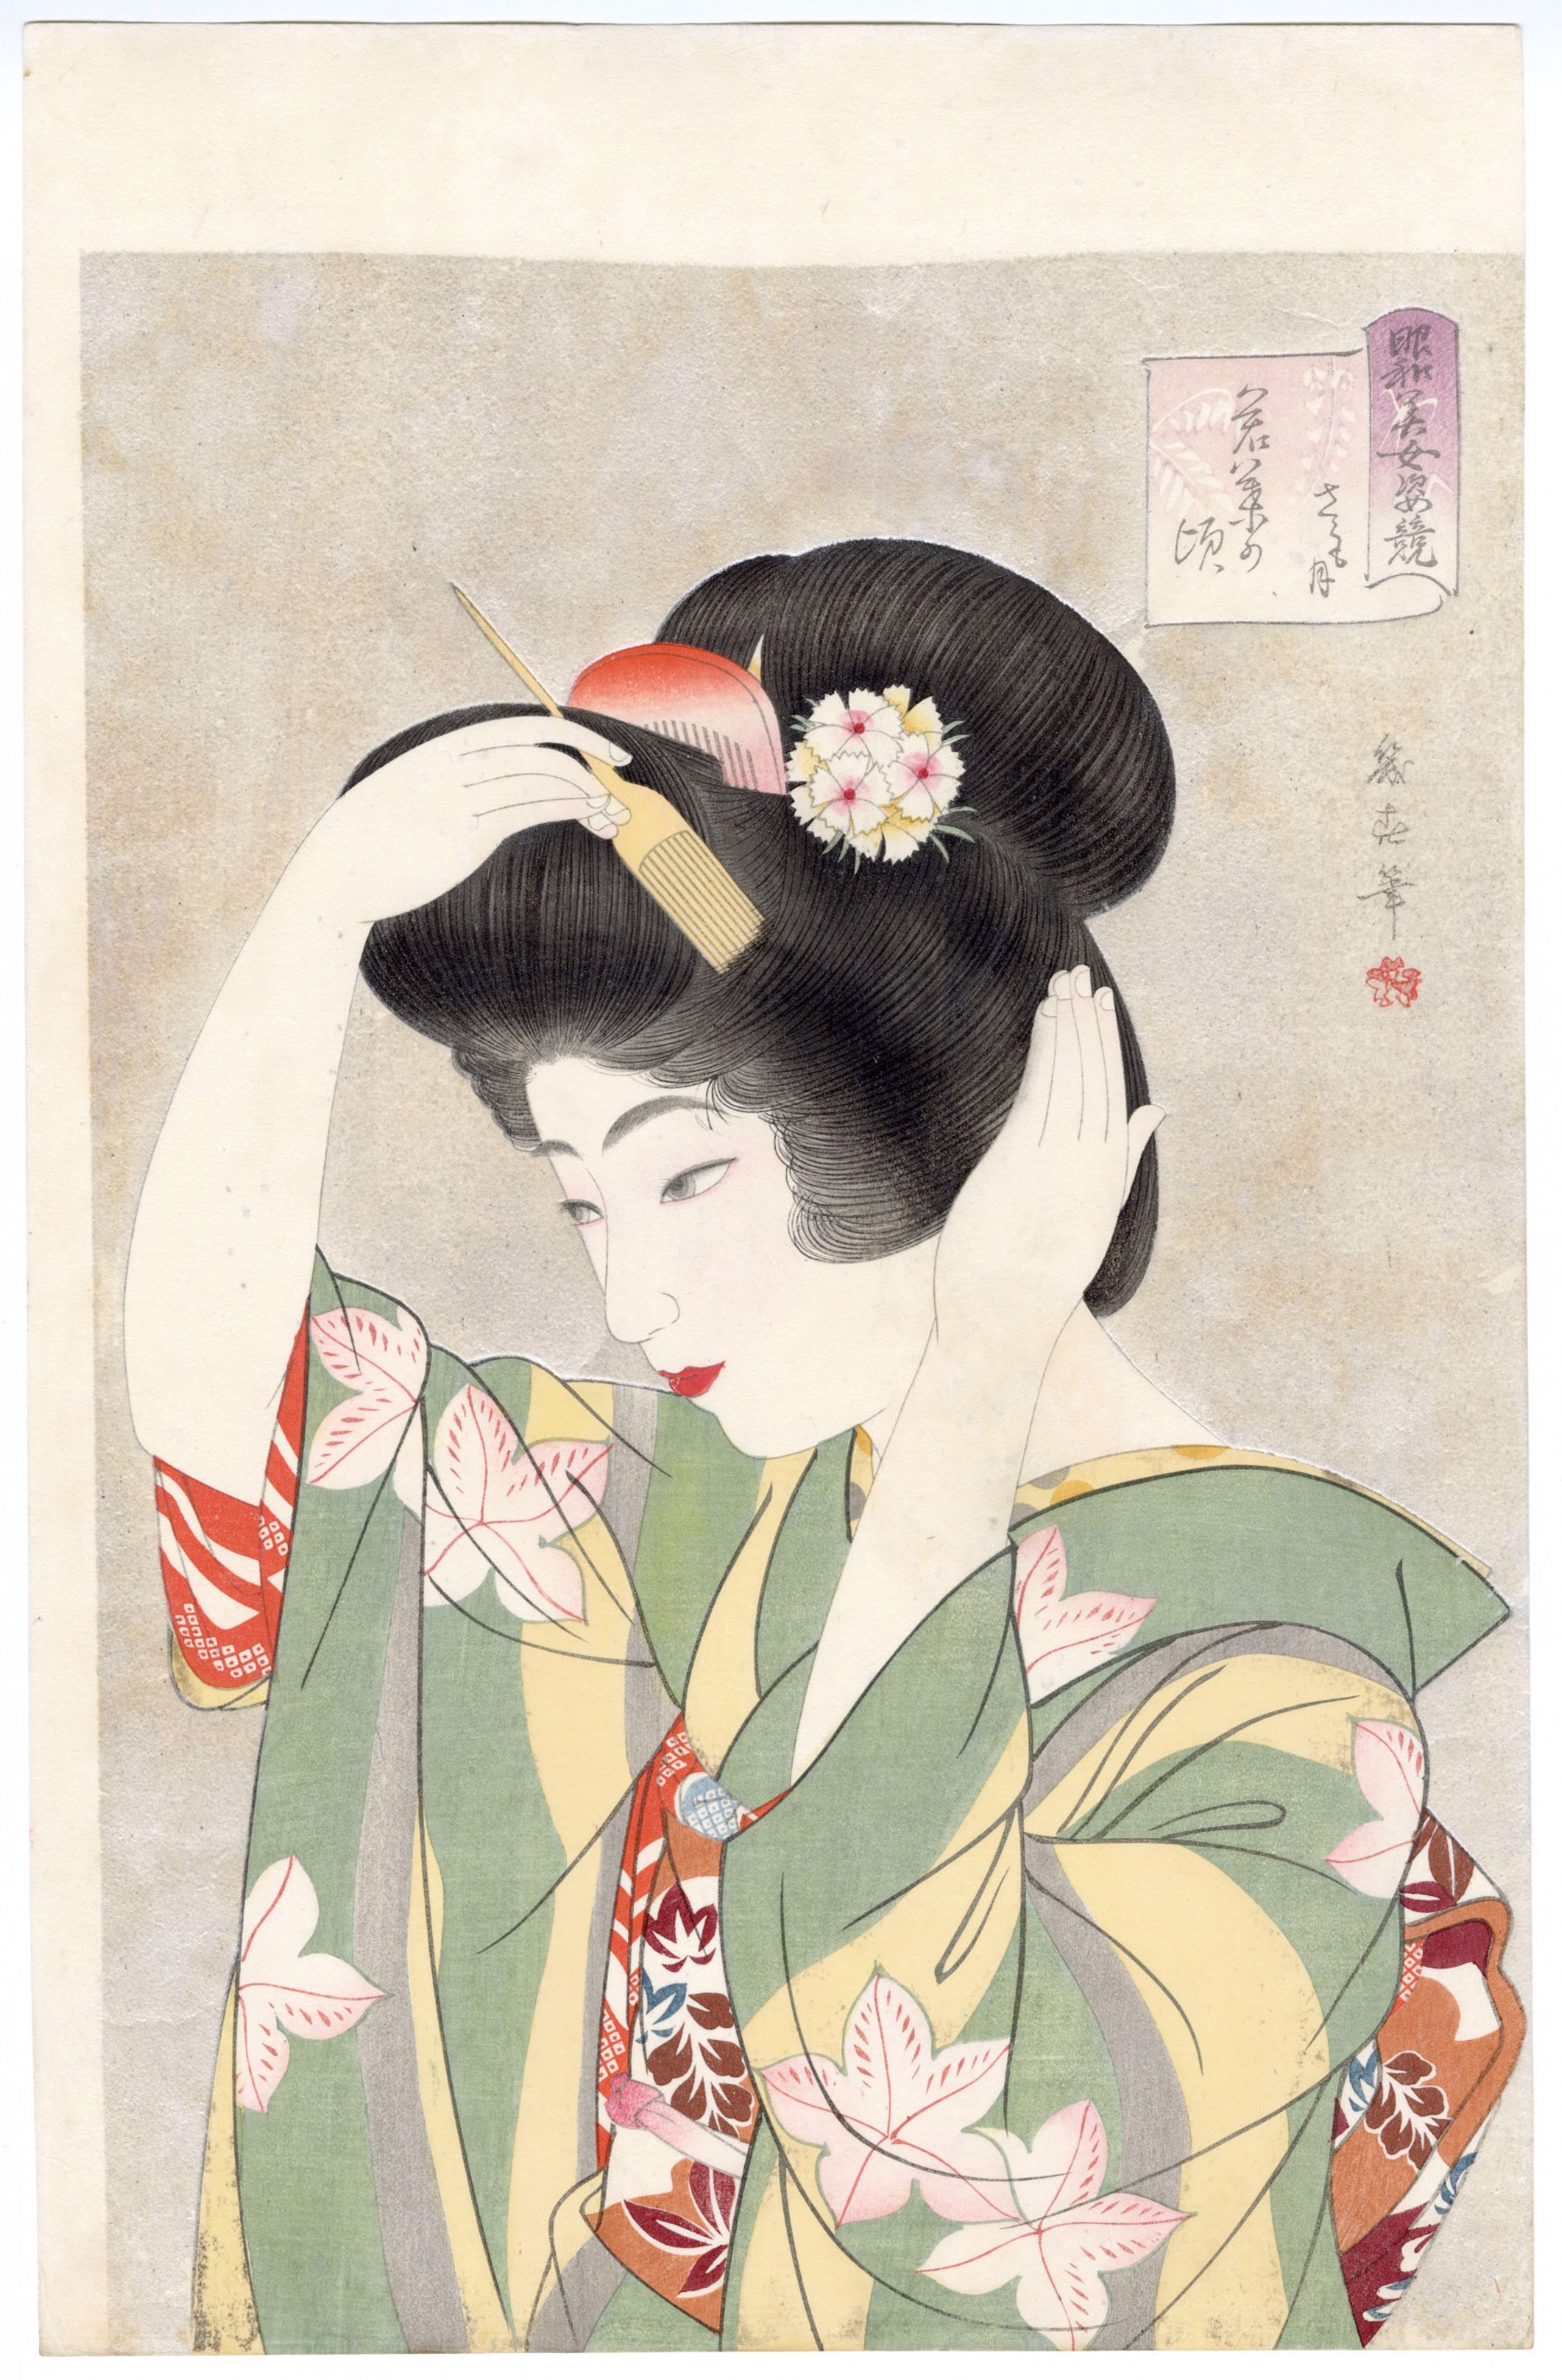 May - Season of Young Leaves Competing Beauties in the Showa Era by Watanabe Ikuharu